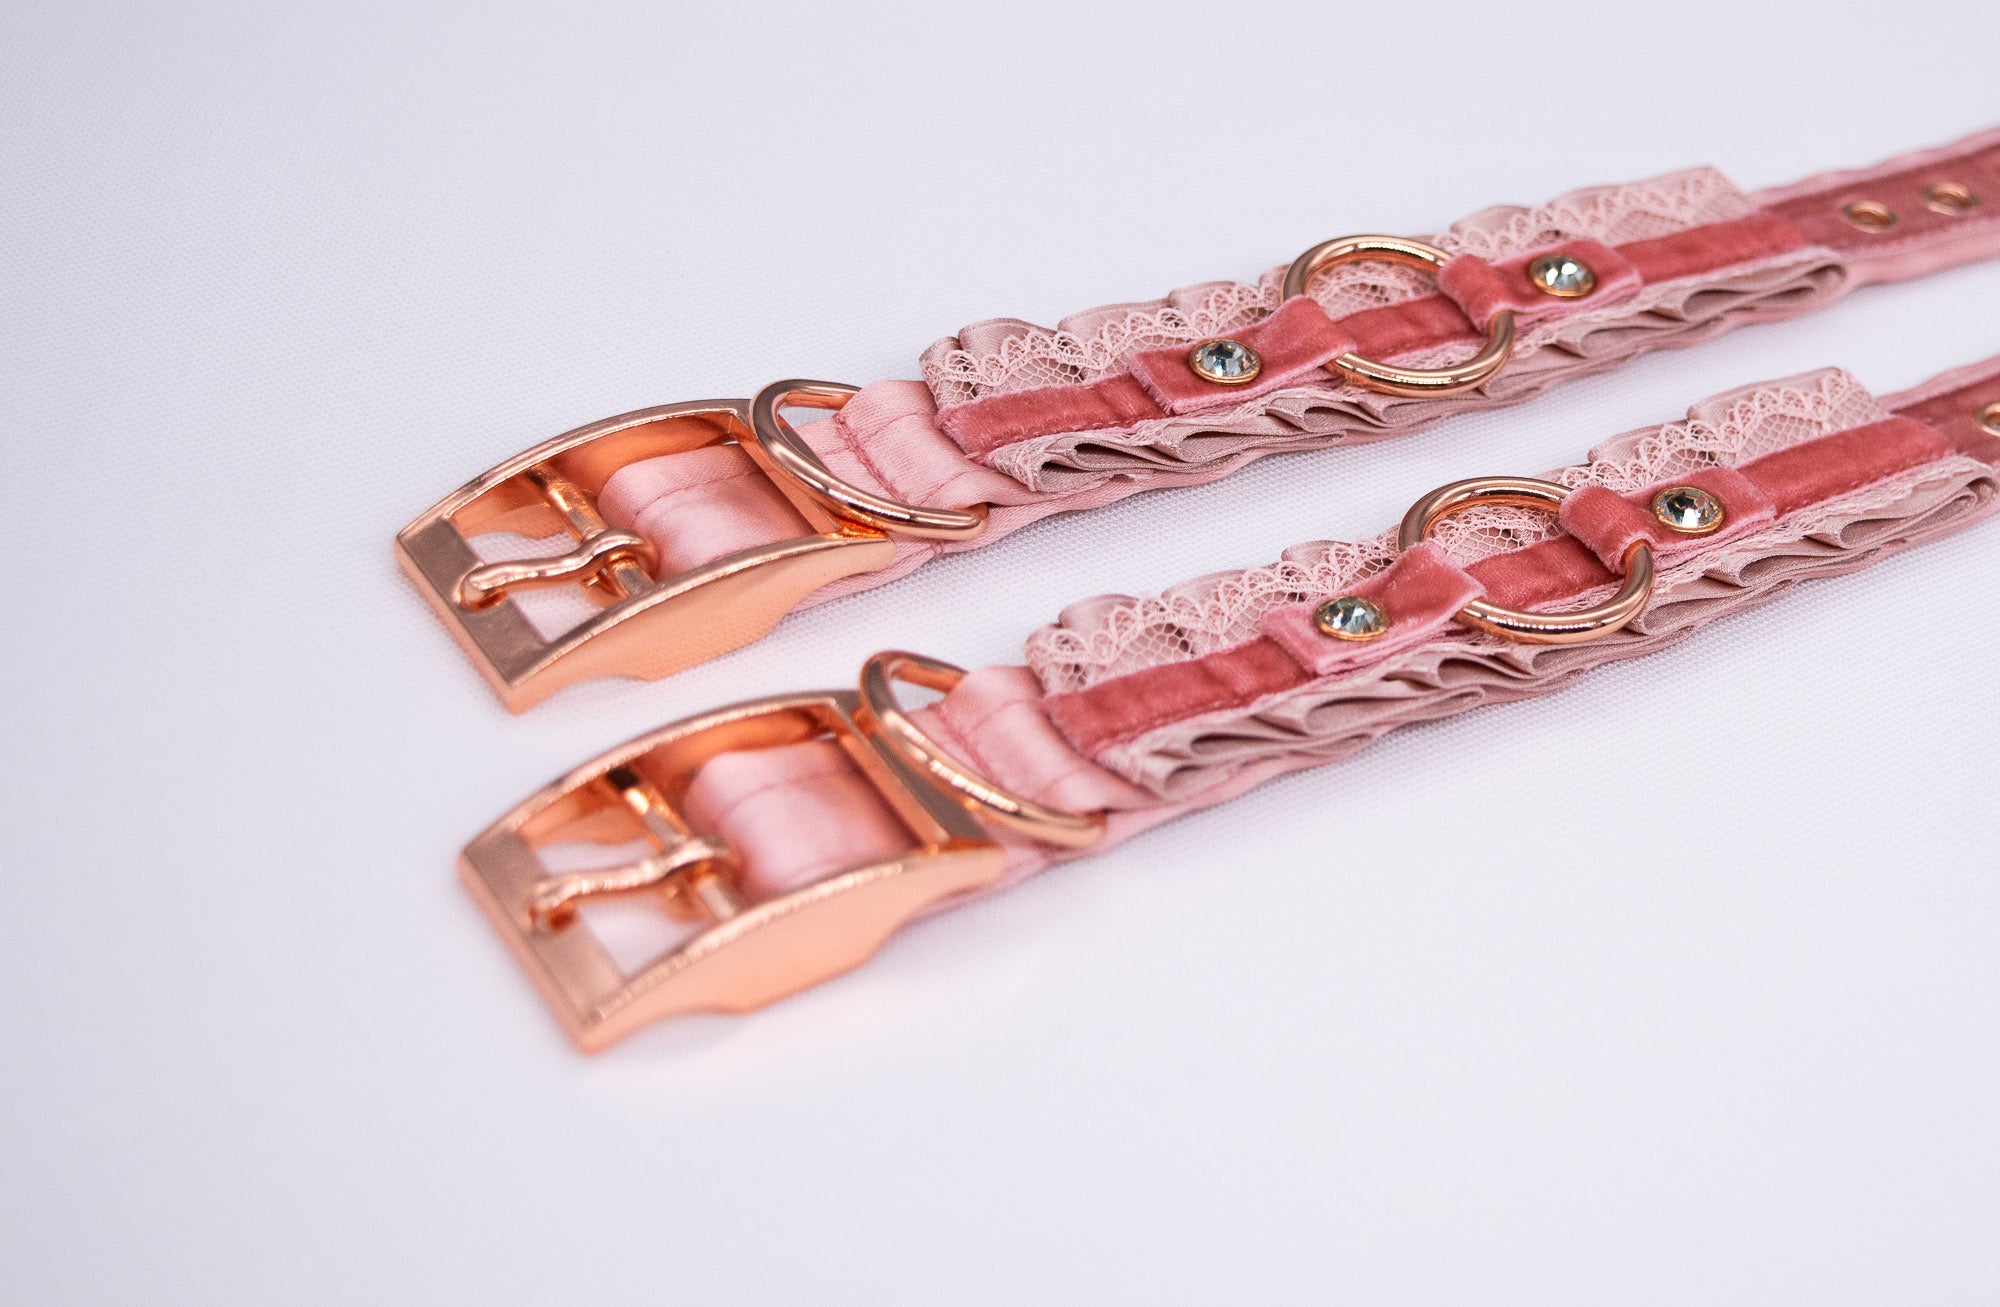 Dusty Rose, Blush Velvet and Lace - Rose Gold BDSM Cuffs